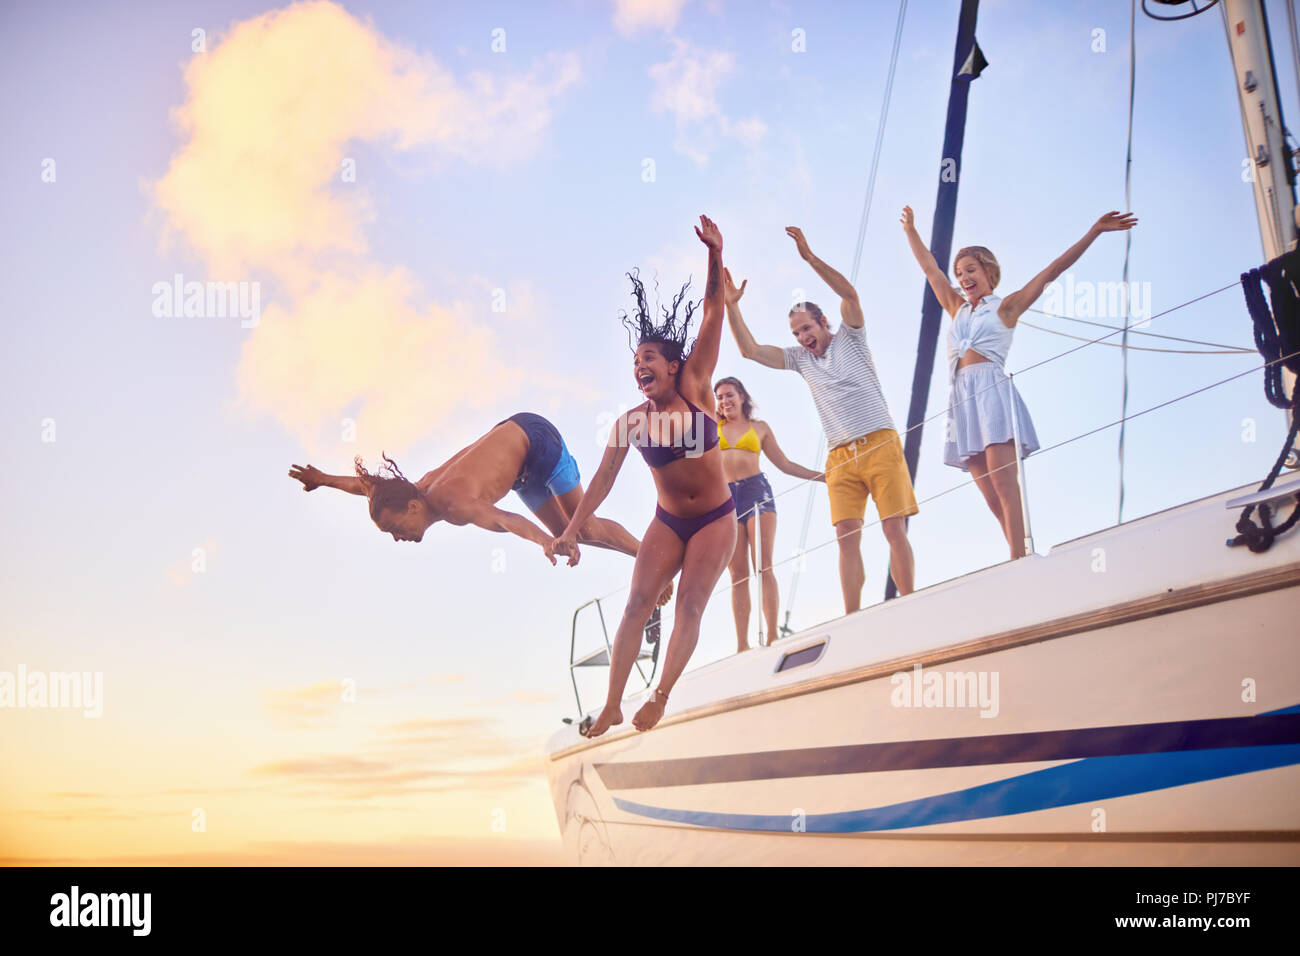 Playful friends jumping off boat Stock Photo